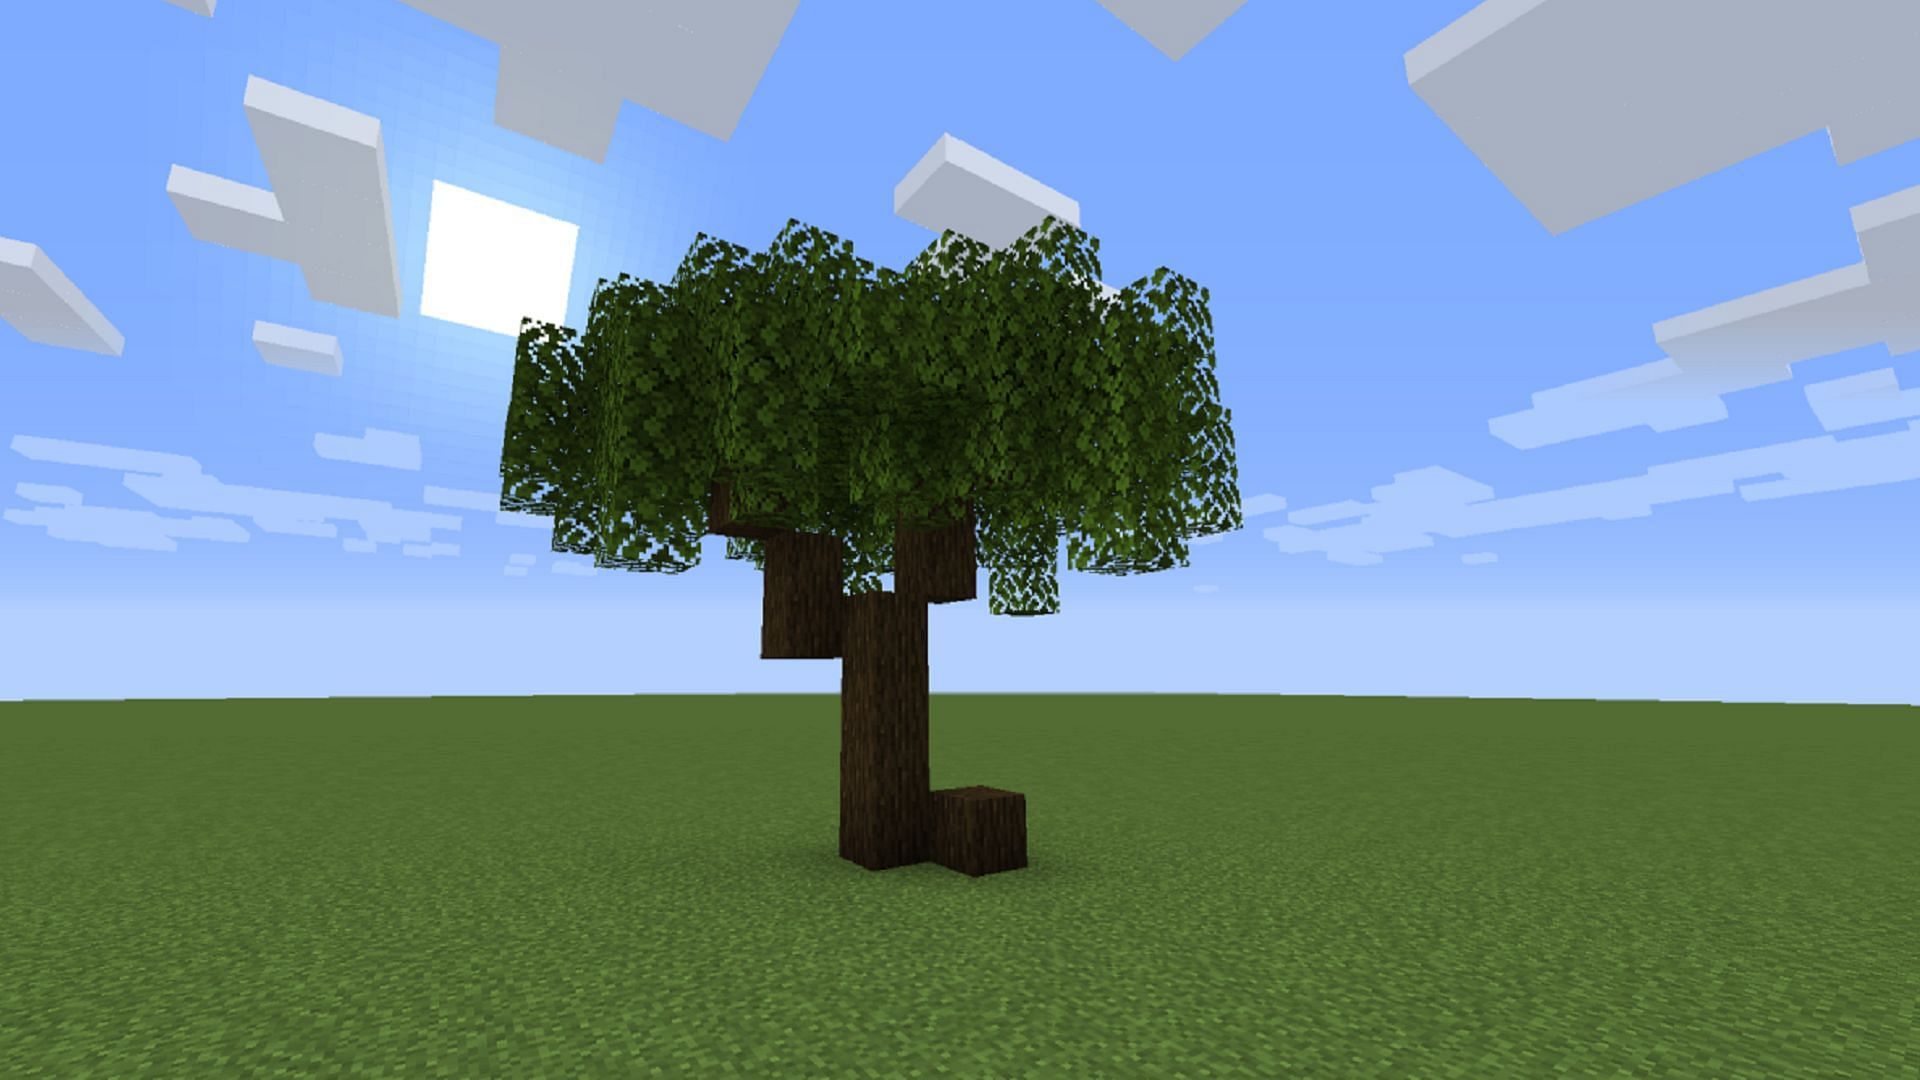 Custom trees in Minecraft can be built by players of any skill level (Image via Minecraft Build Inspiration/tumblr)